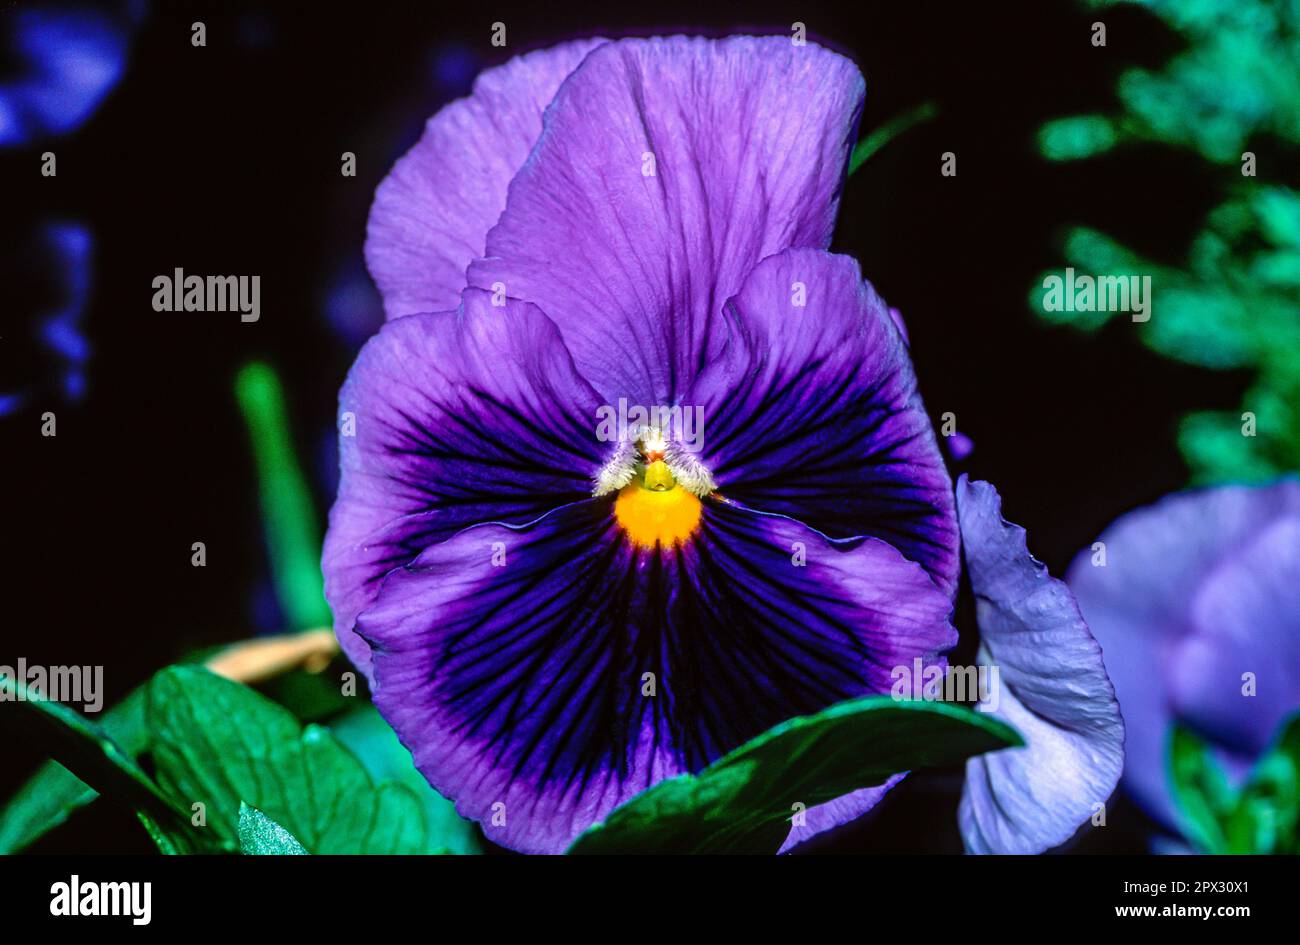 Close-up of the flower of a blue and purple flowering violet Stock Photo